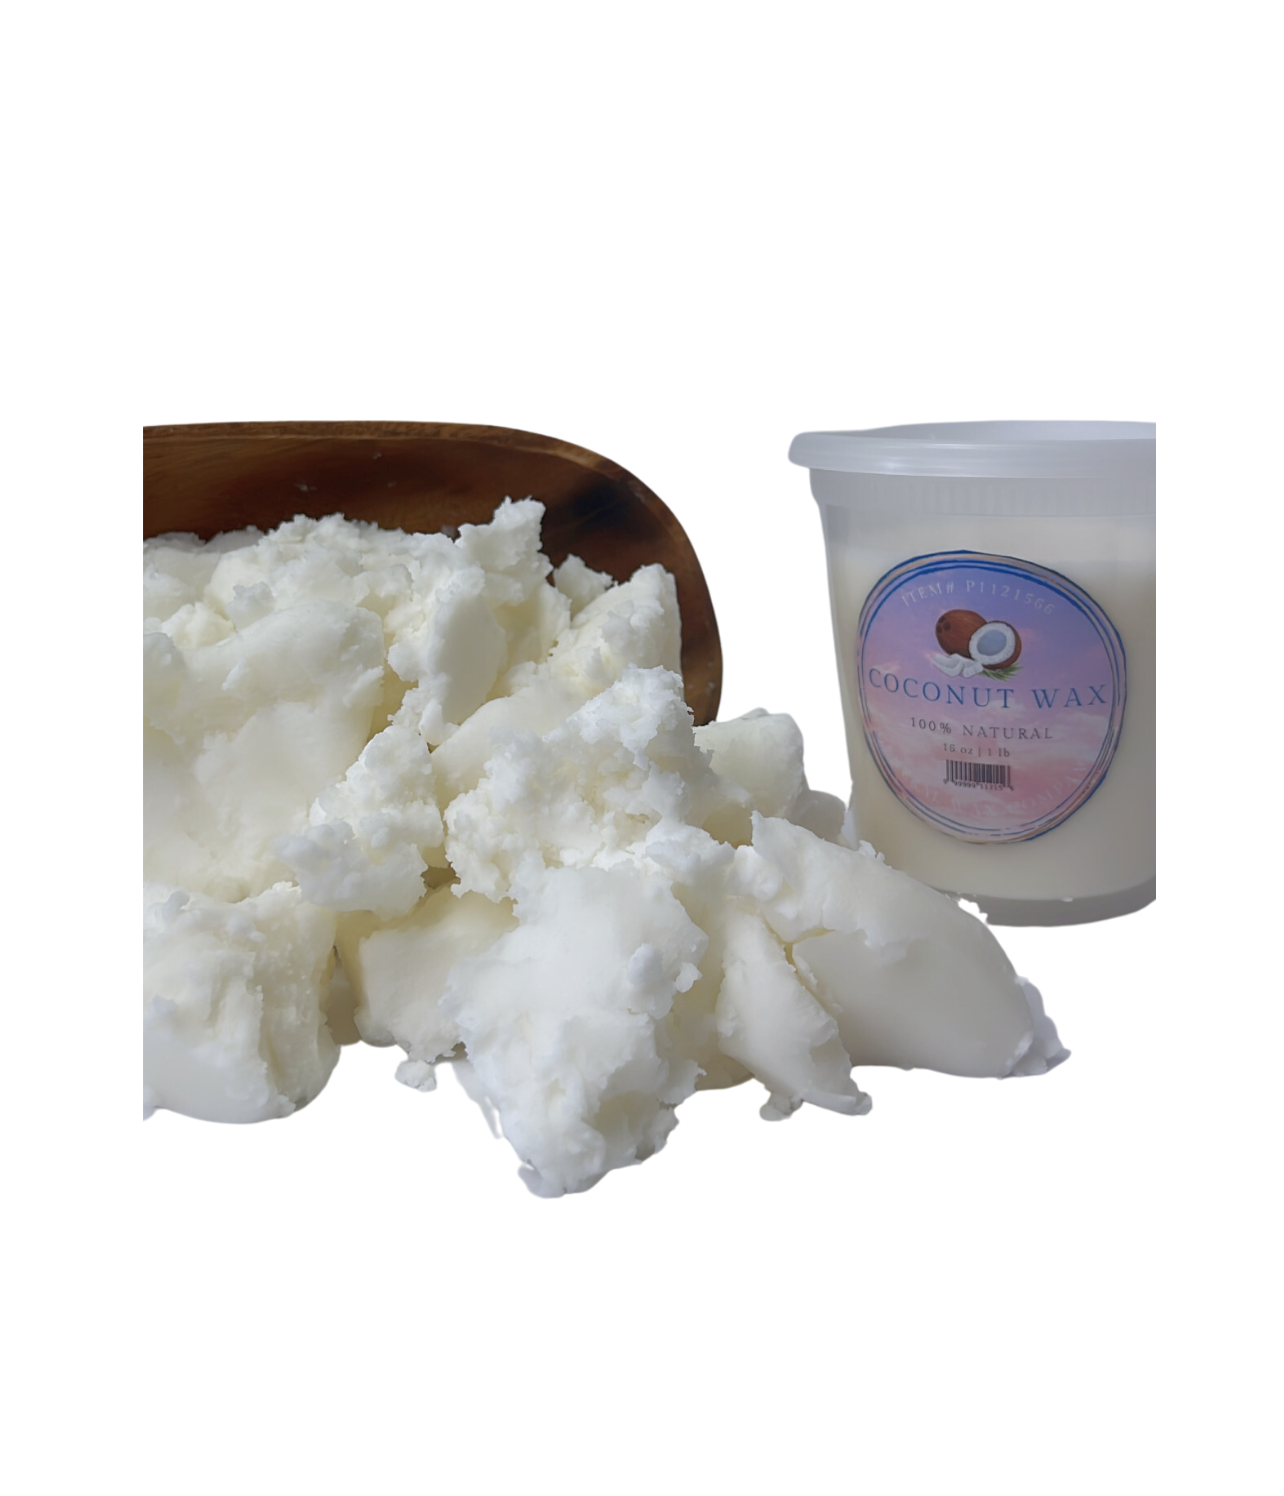 Coconut wax for candle making